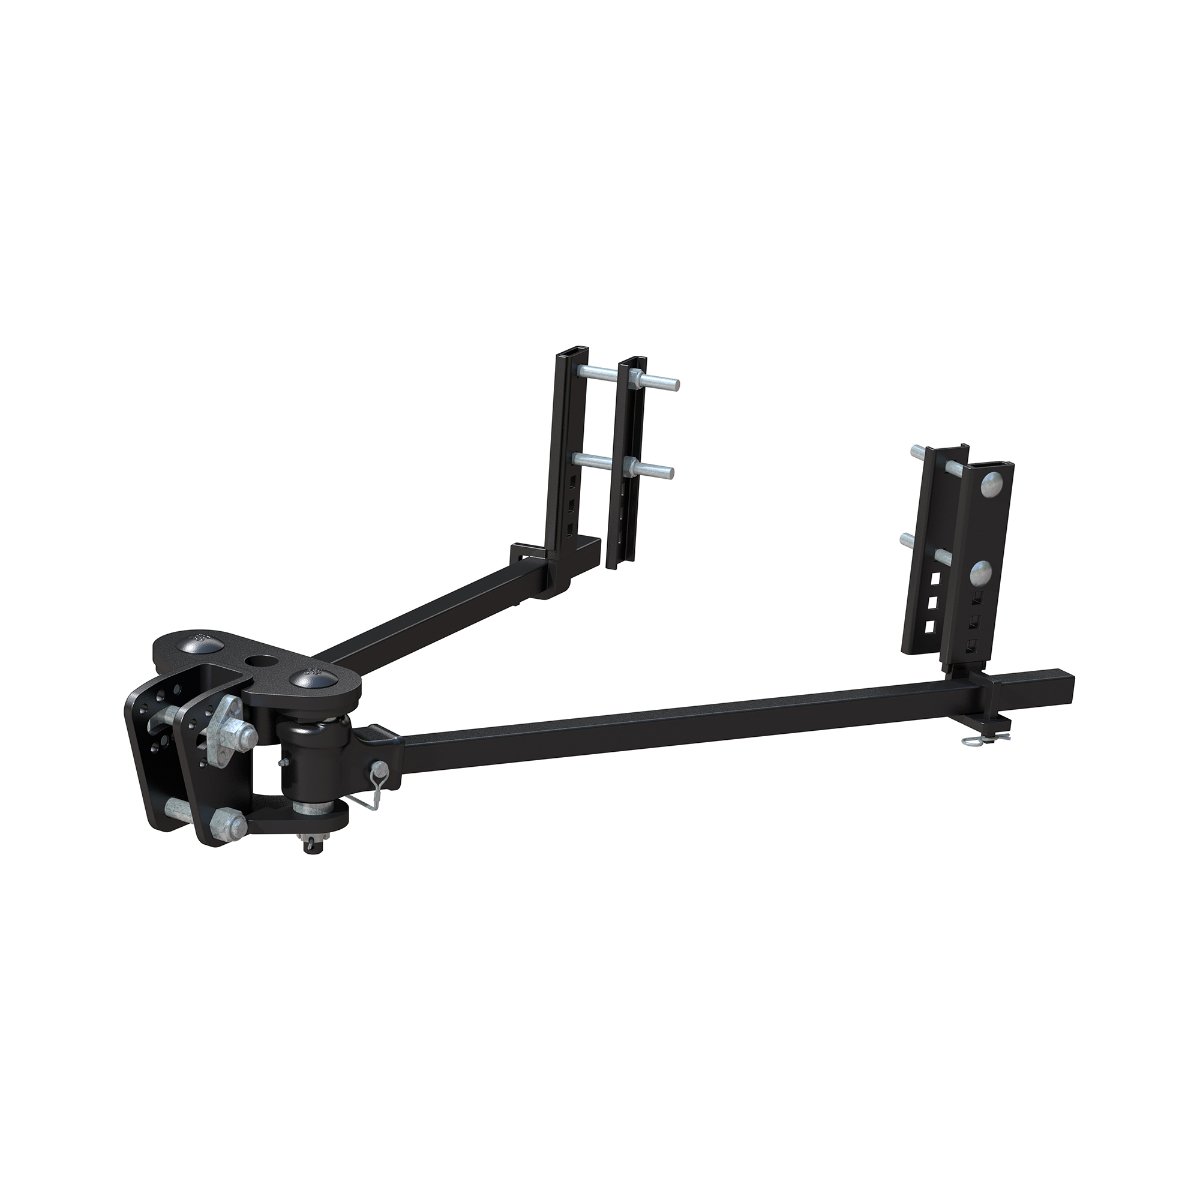 CURT TruTrack™ Weight Distribution Hitch With Sway Control